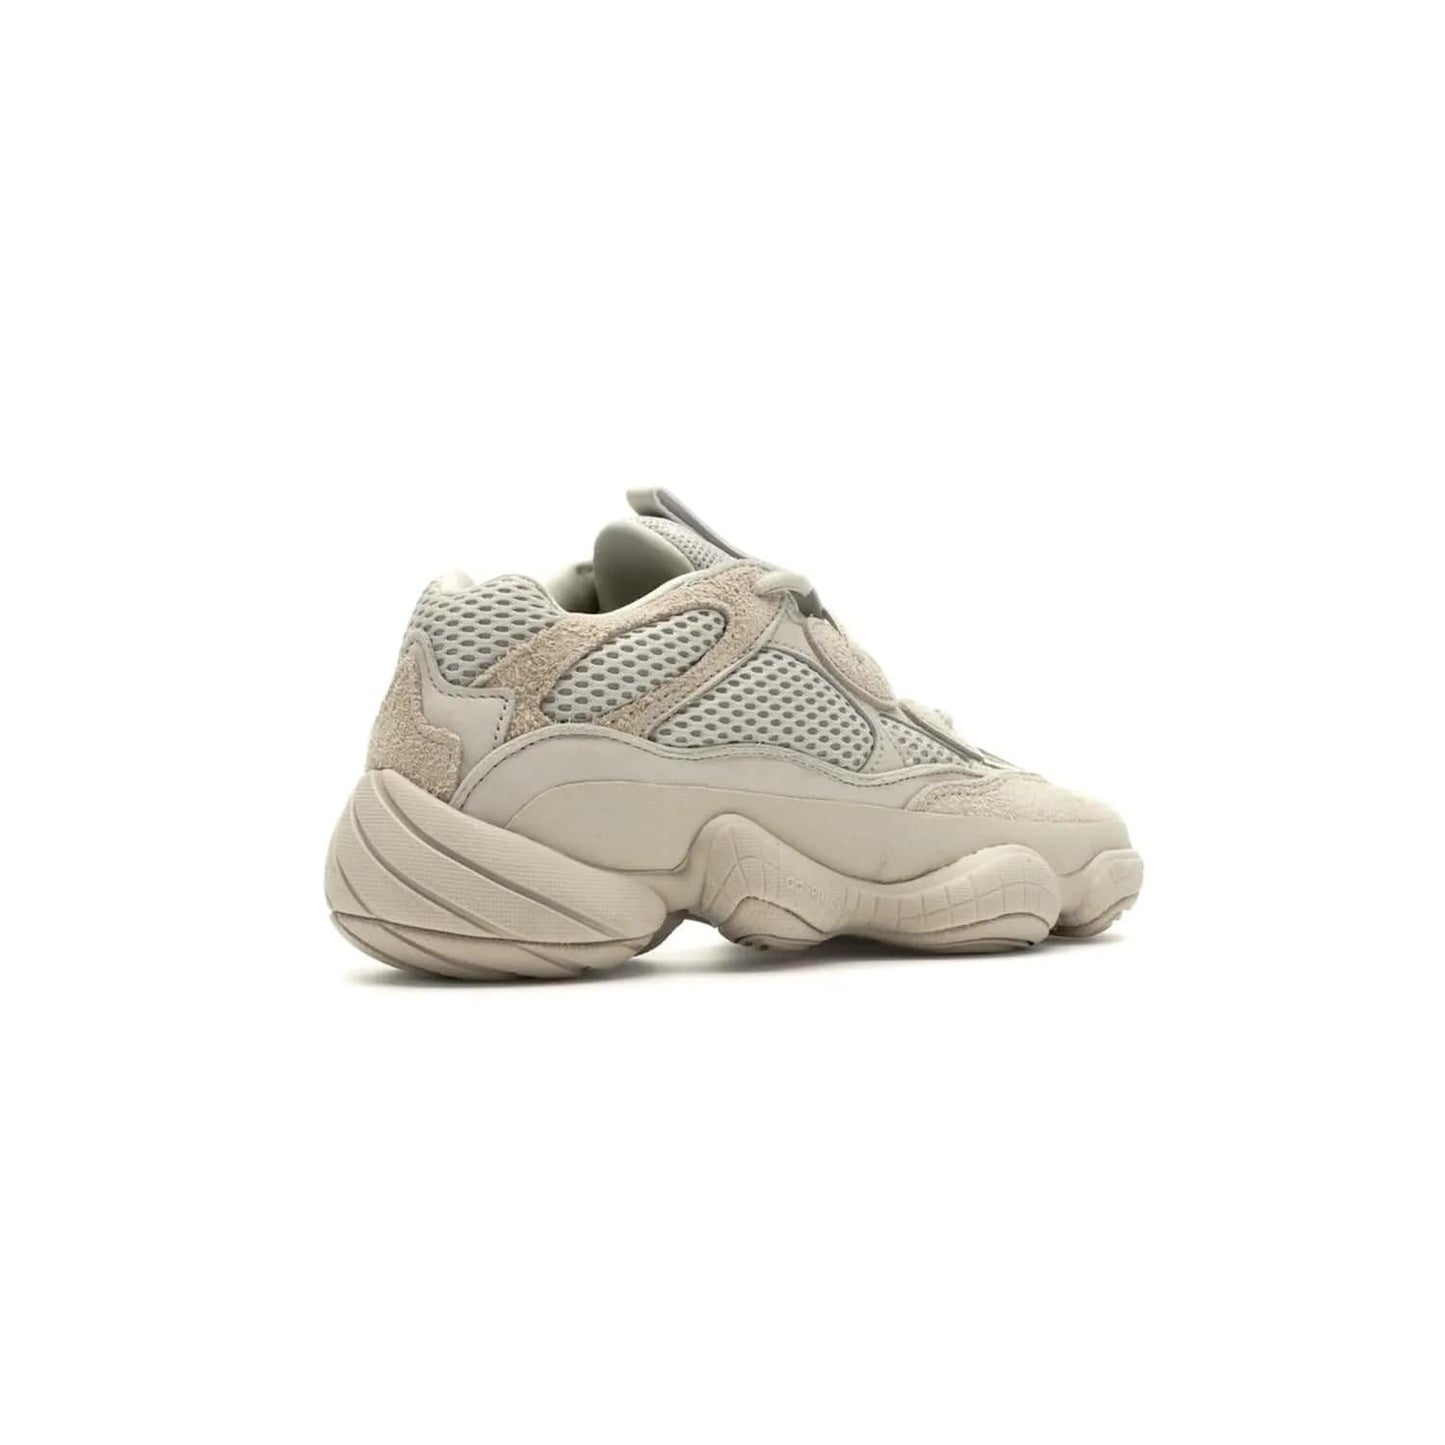 adidas Yeezy 500 Blush - Image 33 - Only at www.BallersClubKickz.com - Step up your sneaker game with the Adidas Yeezy 500 Blush. Monochromatic pale pink palette, hiking-inspired suede/mesh construction, plus adiPRENE sole for comfort and performance. Get the Adidas Yeezy 500 and experience true style and comfort.